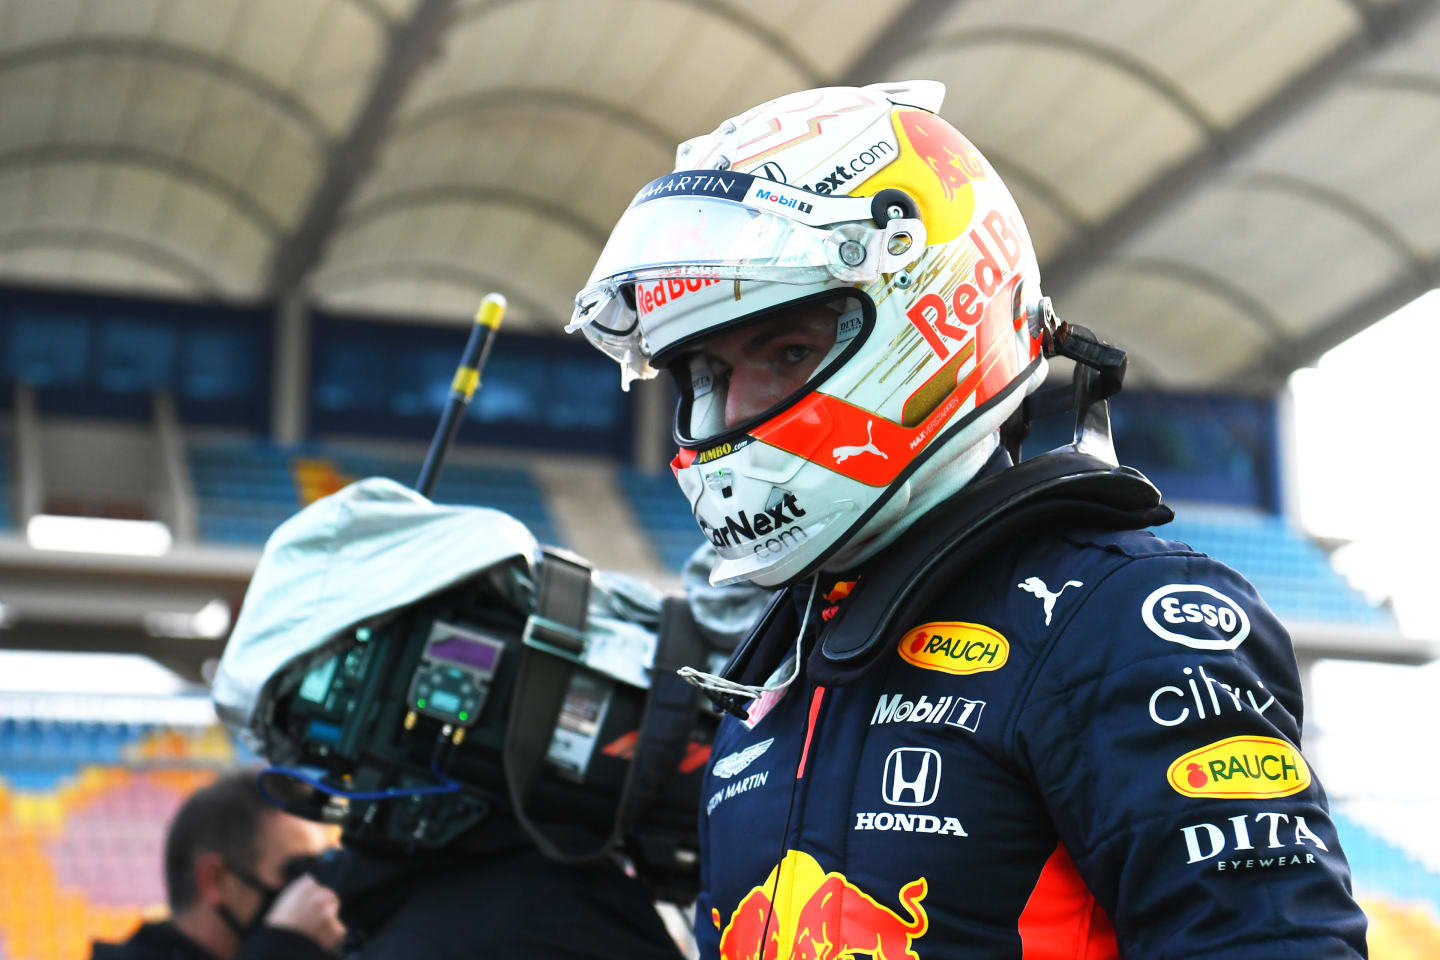 ISTANBUL, TURKEY - NOVEMBER 14: Second placed qualifier Max Verstappen of Netherlands and Red Bull Racing looks on in parc ferme during qualifying ahead of the F1 Grand Prix of Turkey at Intercity Istanbul Park on November 14, 2020 in Istanbul, Turkey. (Photo by Clive Mason/Getty Images)